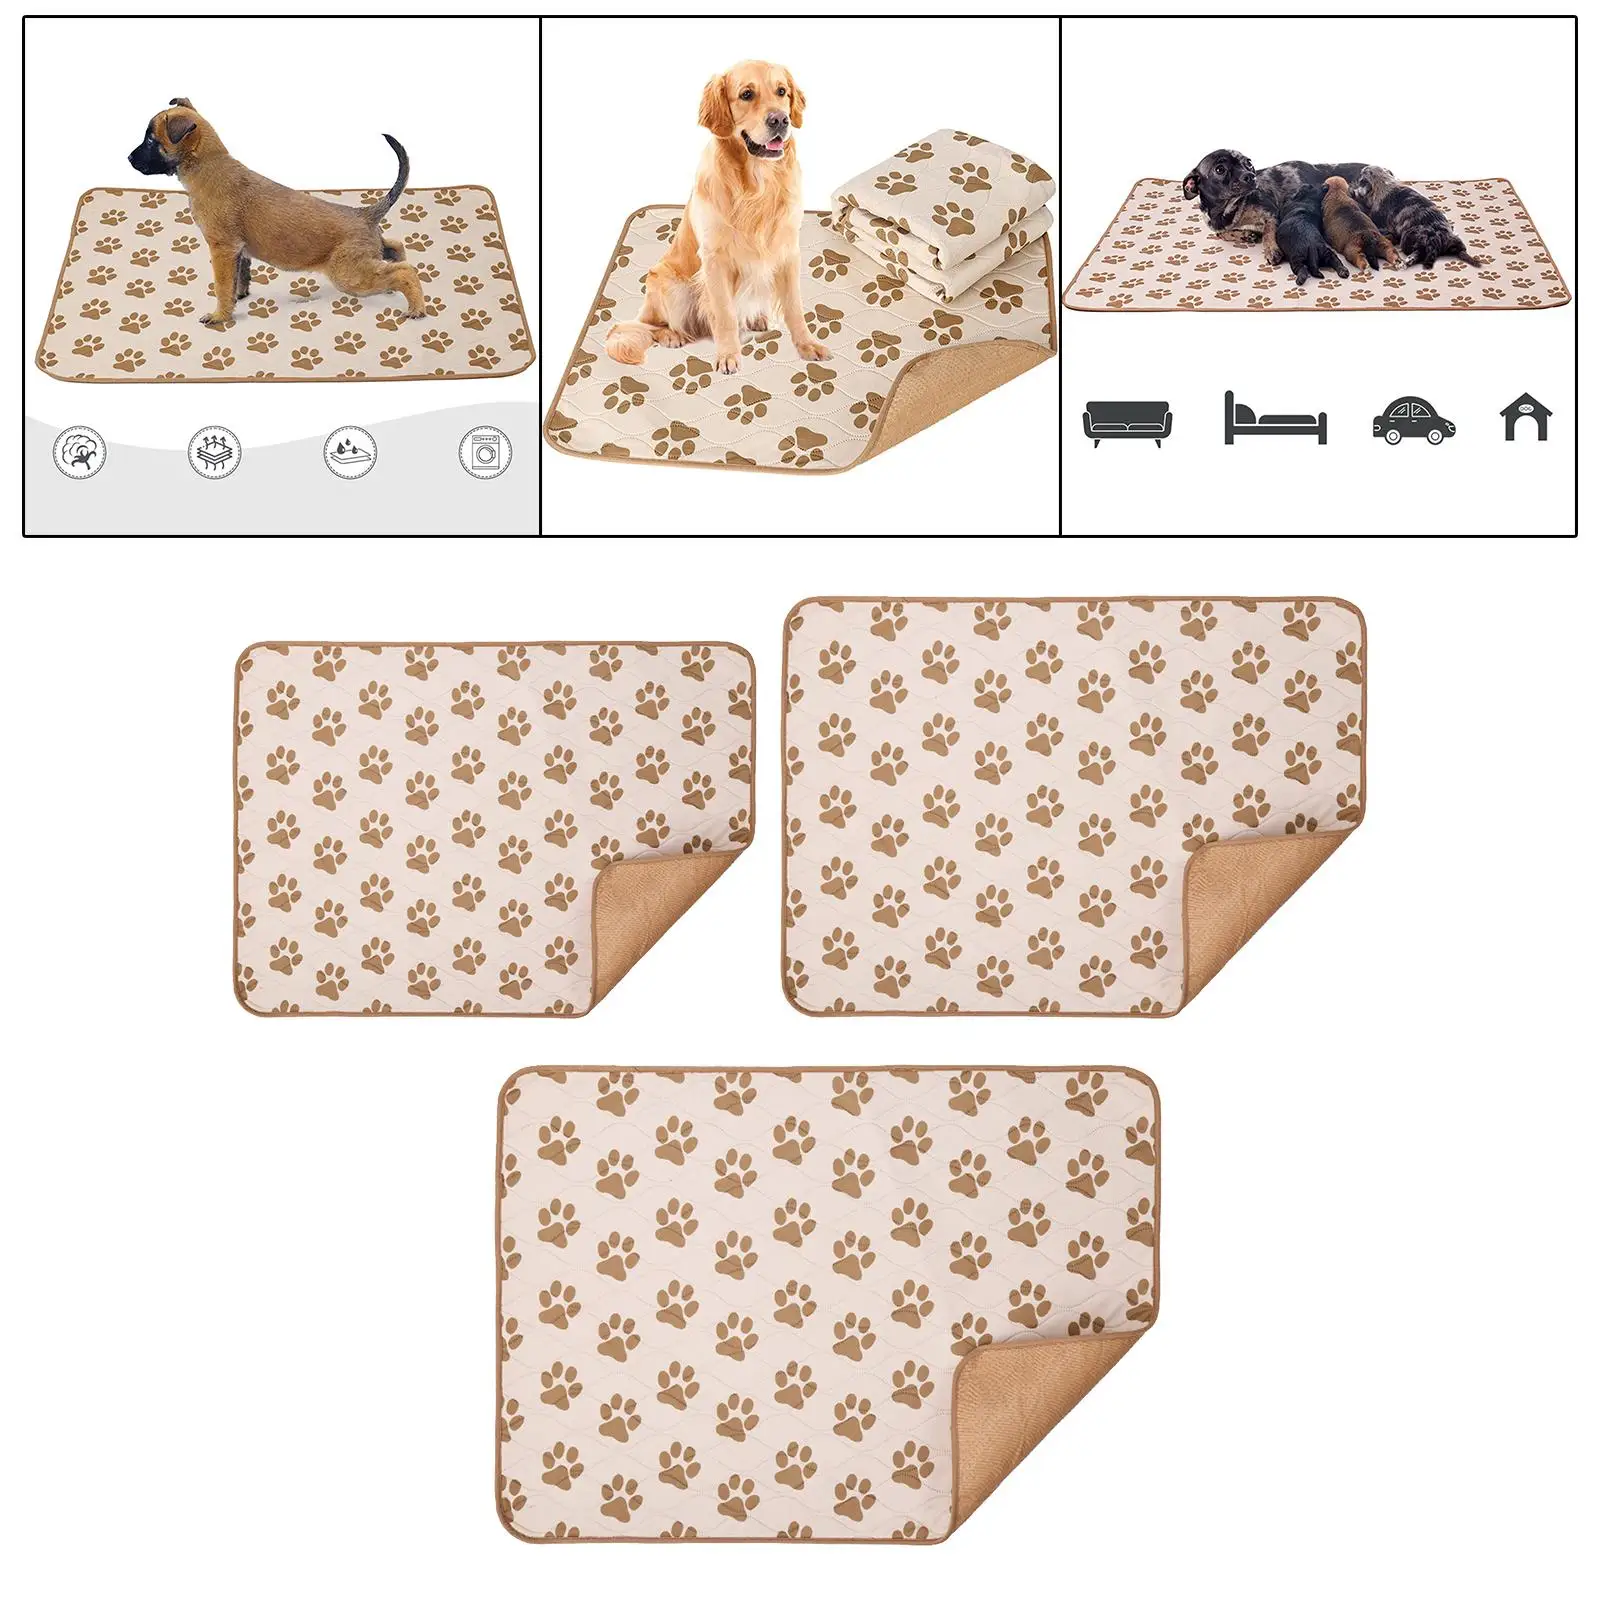 Pet Pee Pad Piddle Potty Mat Cage Accessories Dog Training Pad for Kennel Crate Playpen